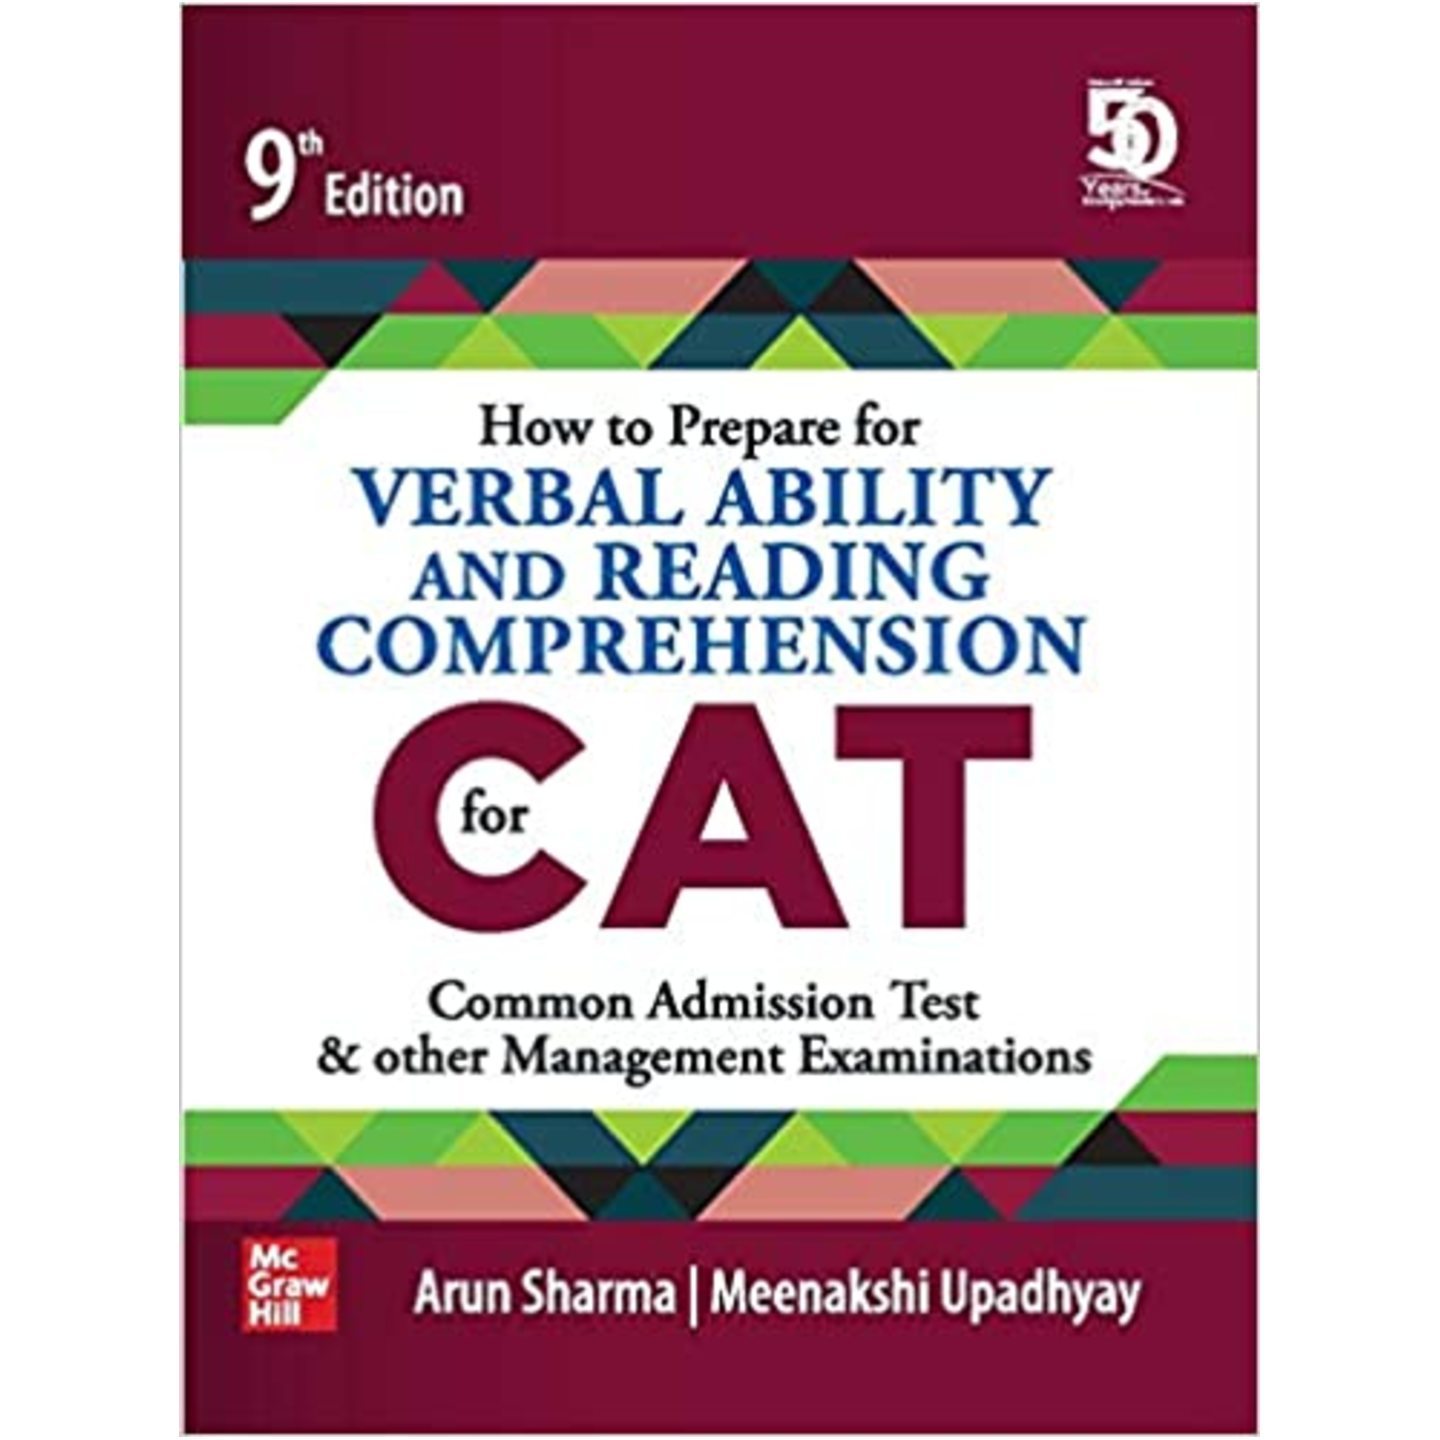 MC GRAW HILL How to Prepare for Verbal Ability and Reading Comprehension for CAT ARUN SHARMA